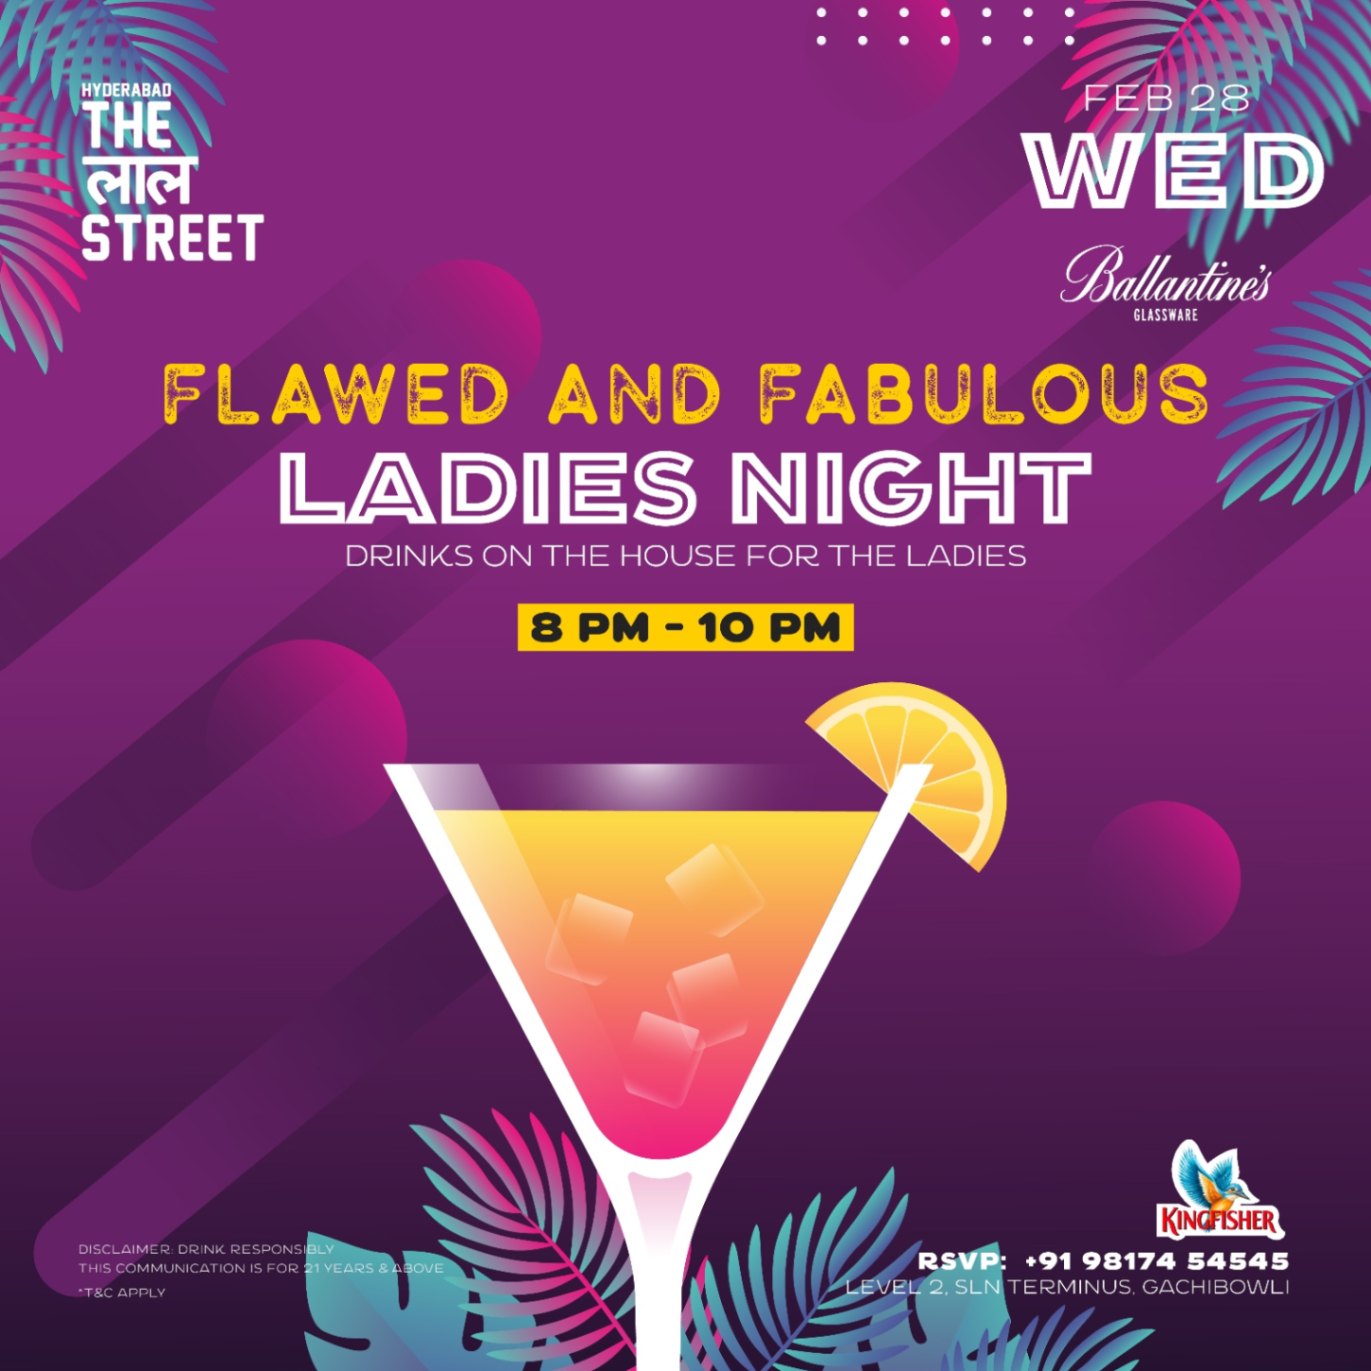 WEDNESDAY FLAWED AND FABULOUS LADIES NIGHT